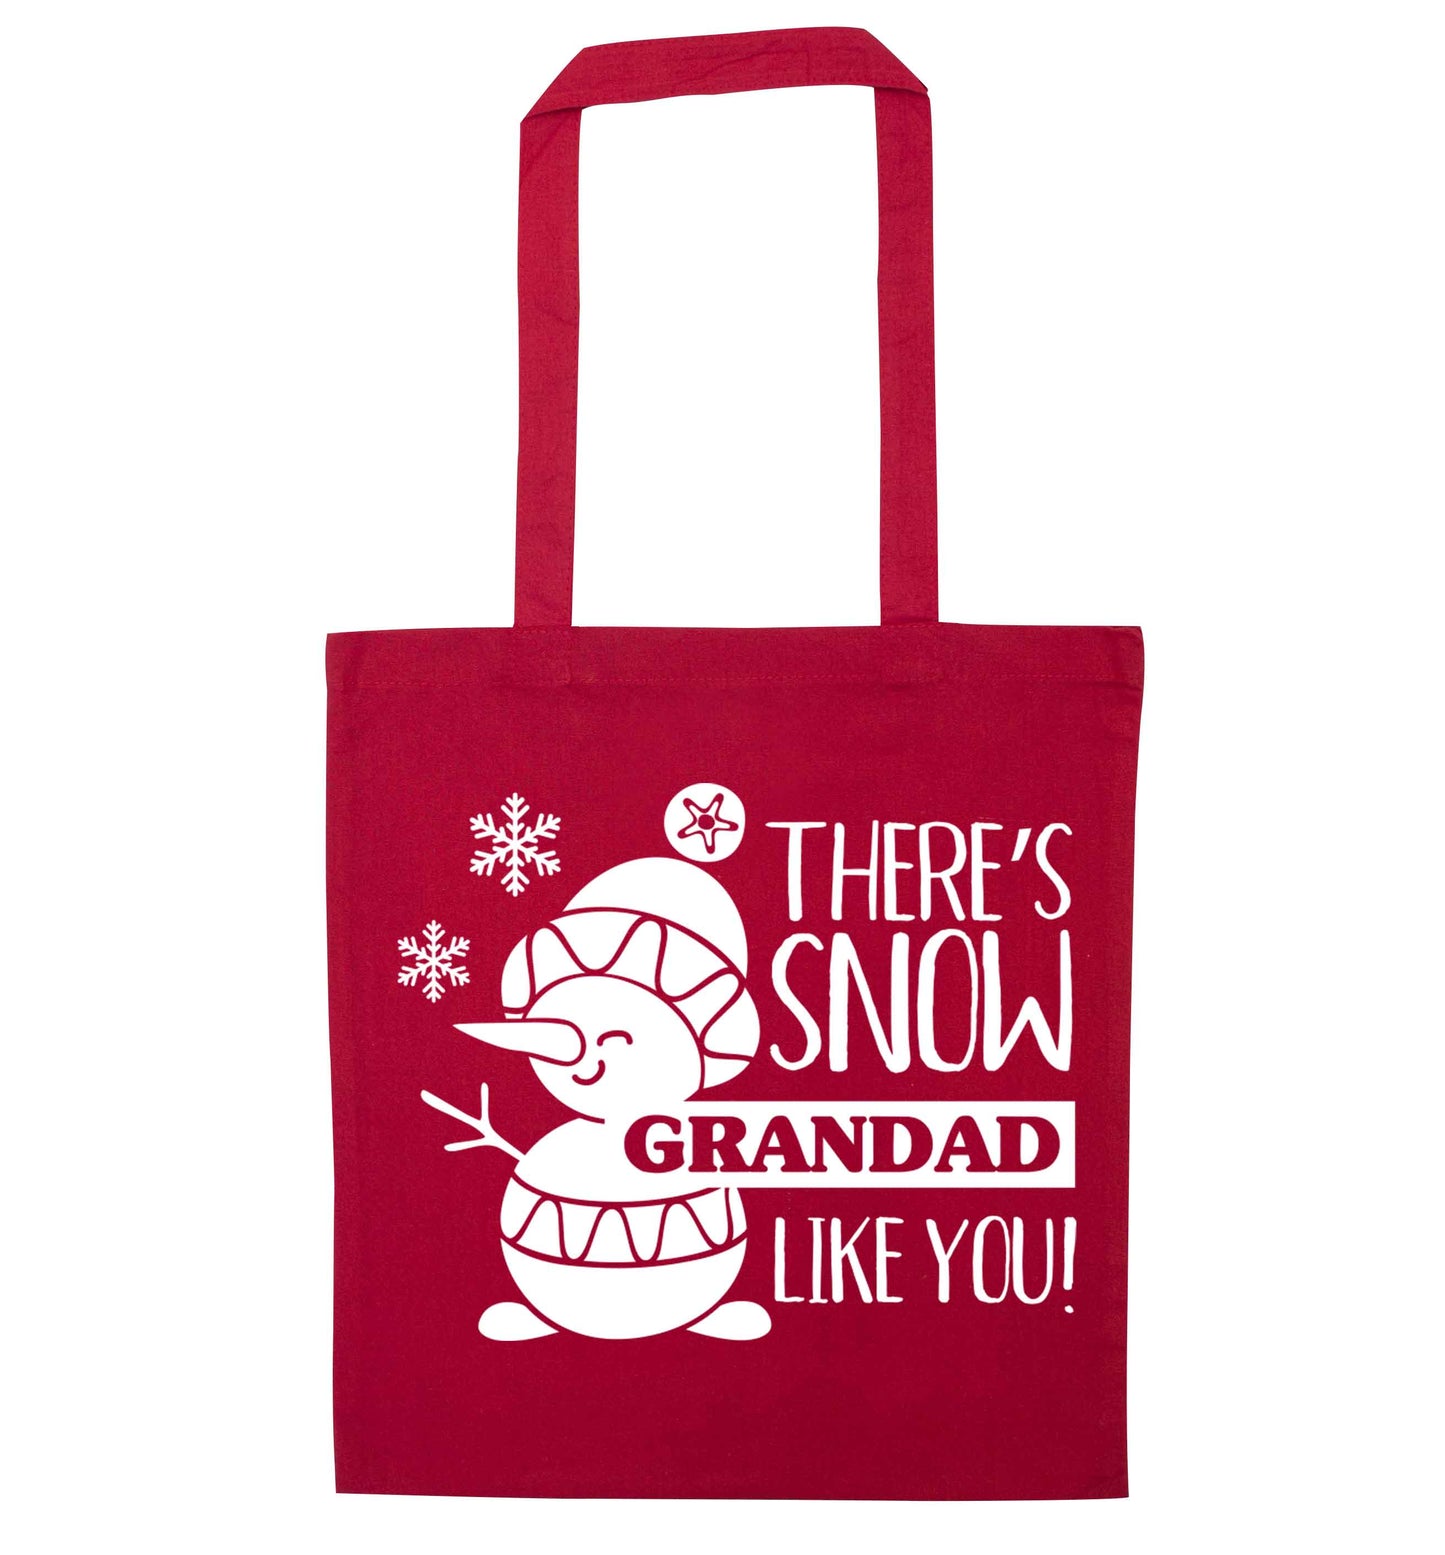 There's snow grandad like you red tote bag